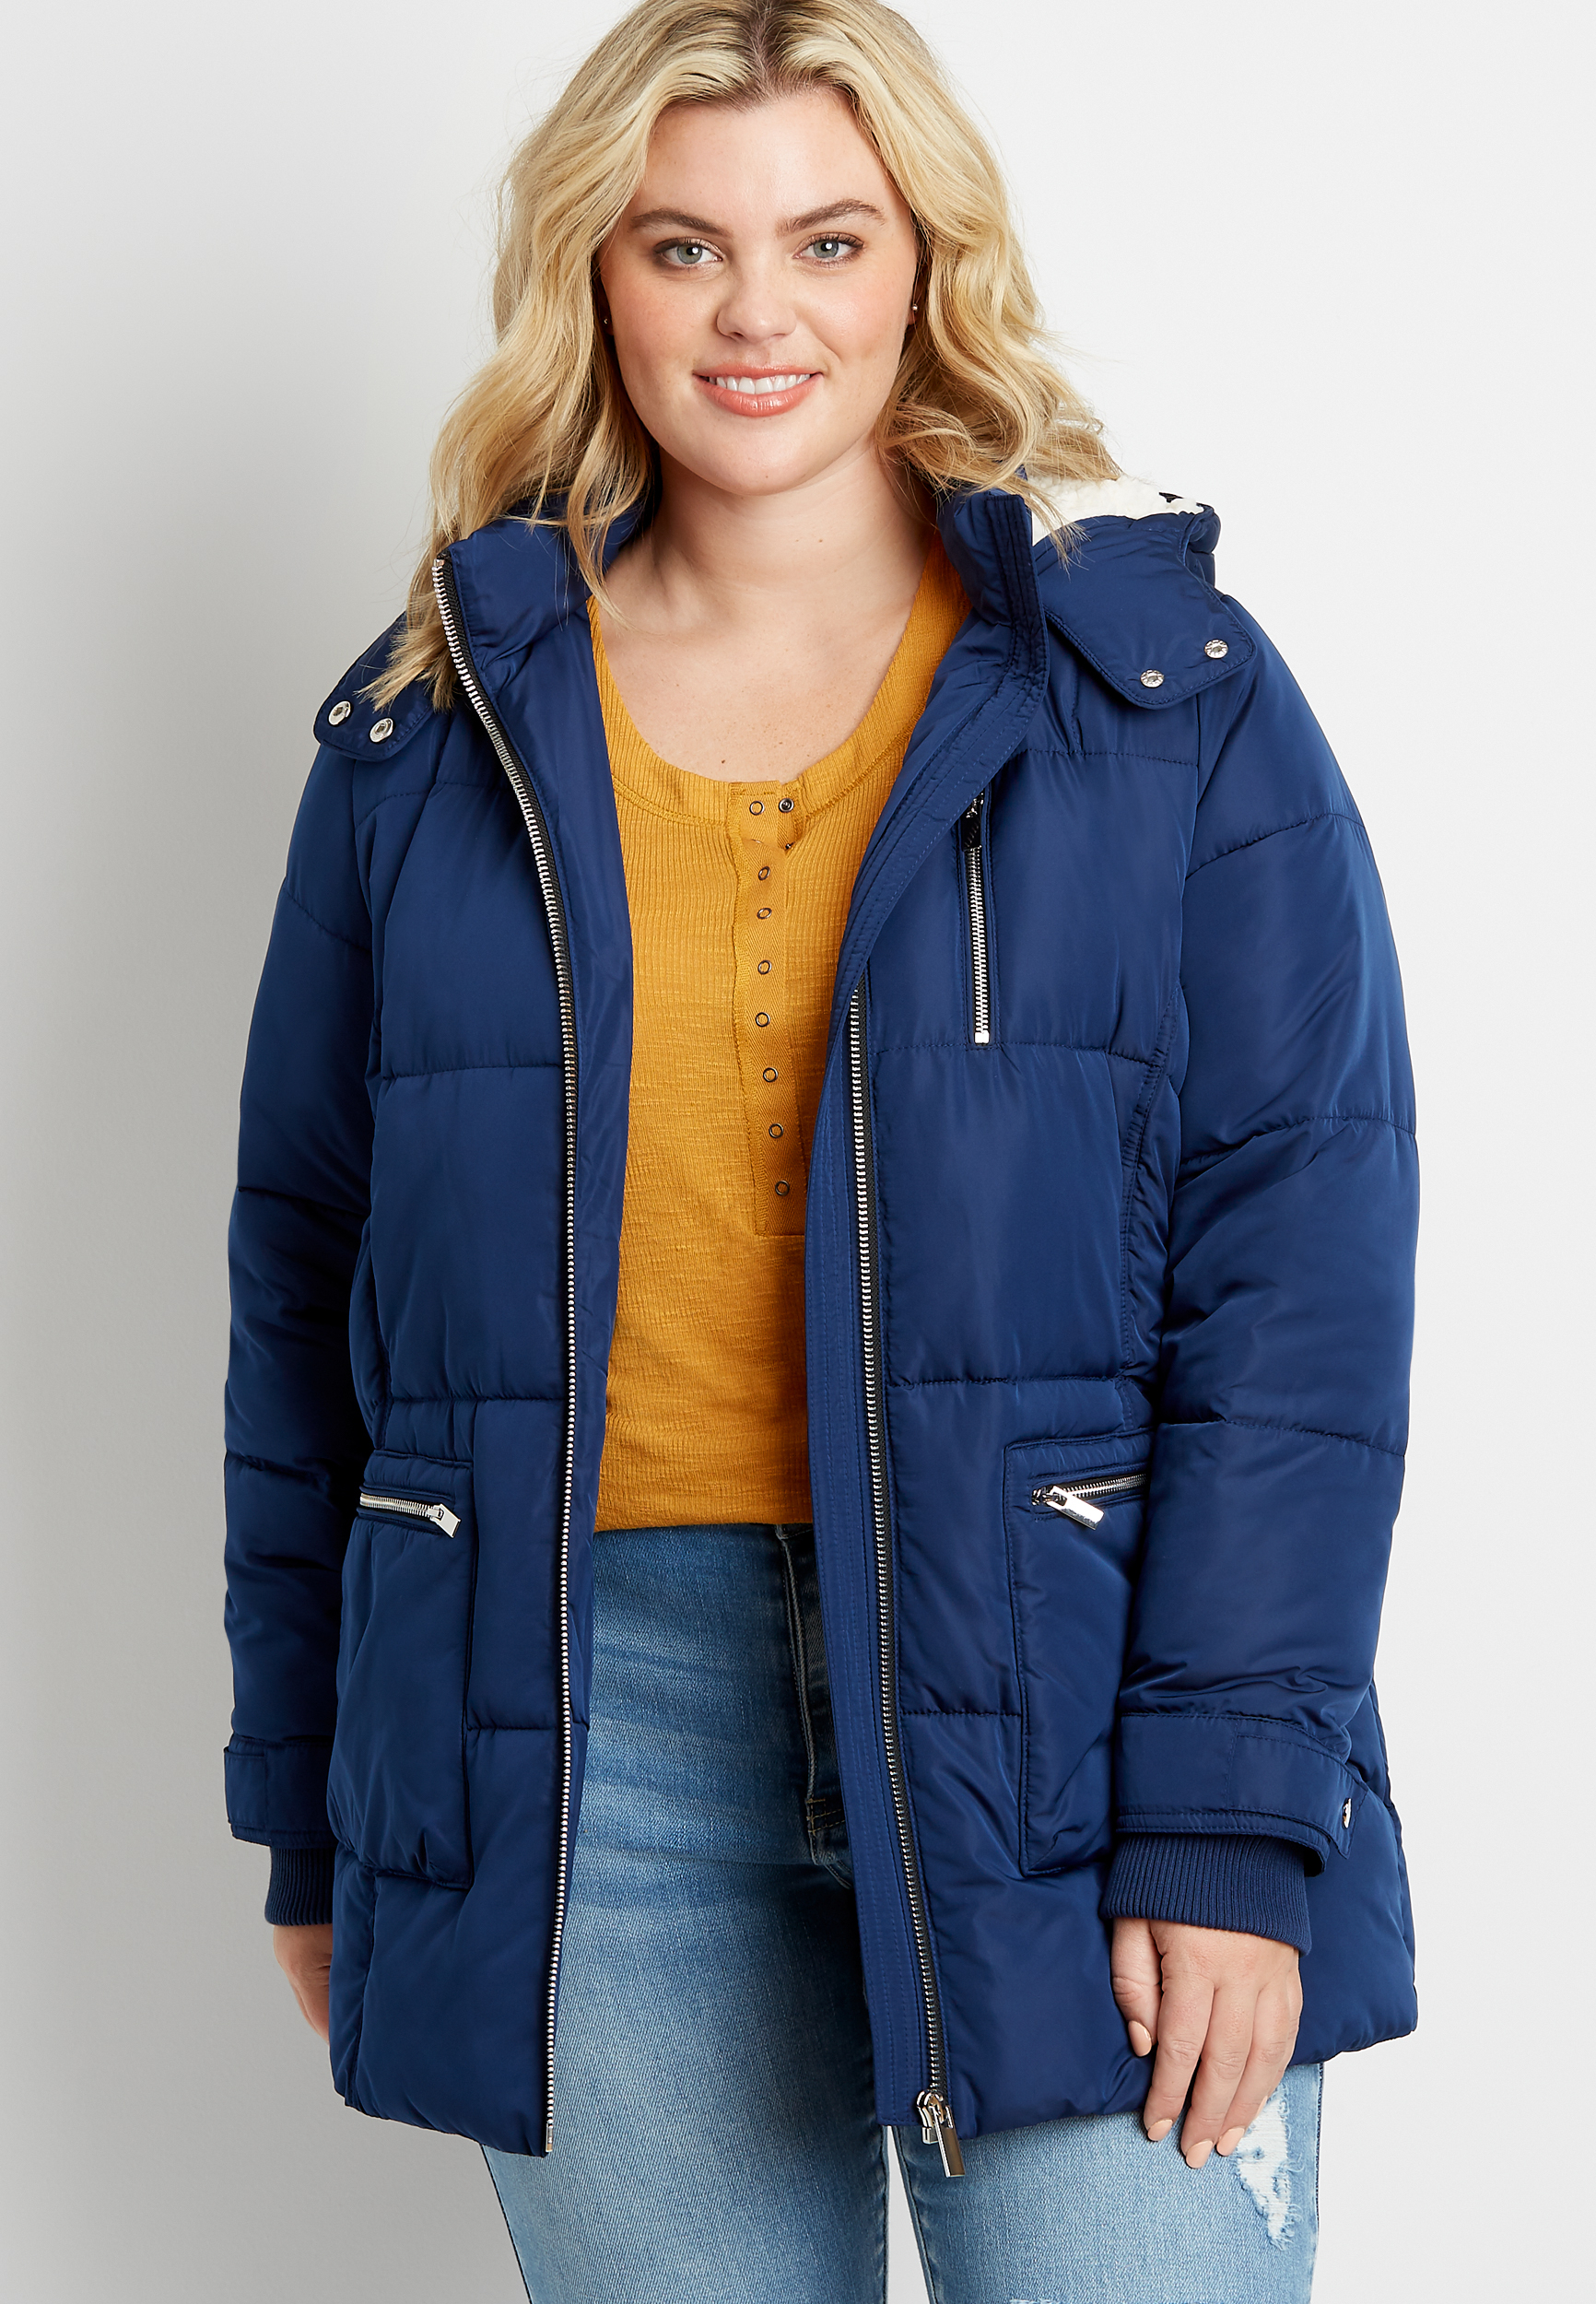 Plus Size Blue Sherpa Lined Hooded Puffer Outerwear Jacket | maurices